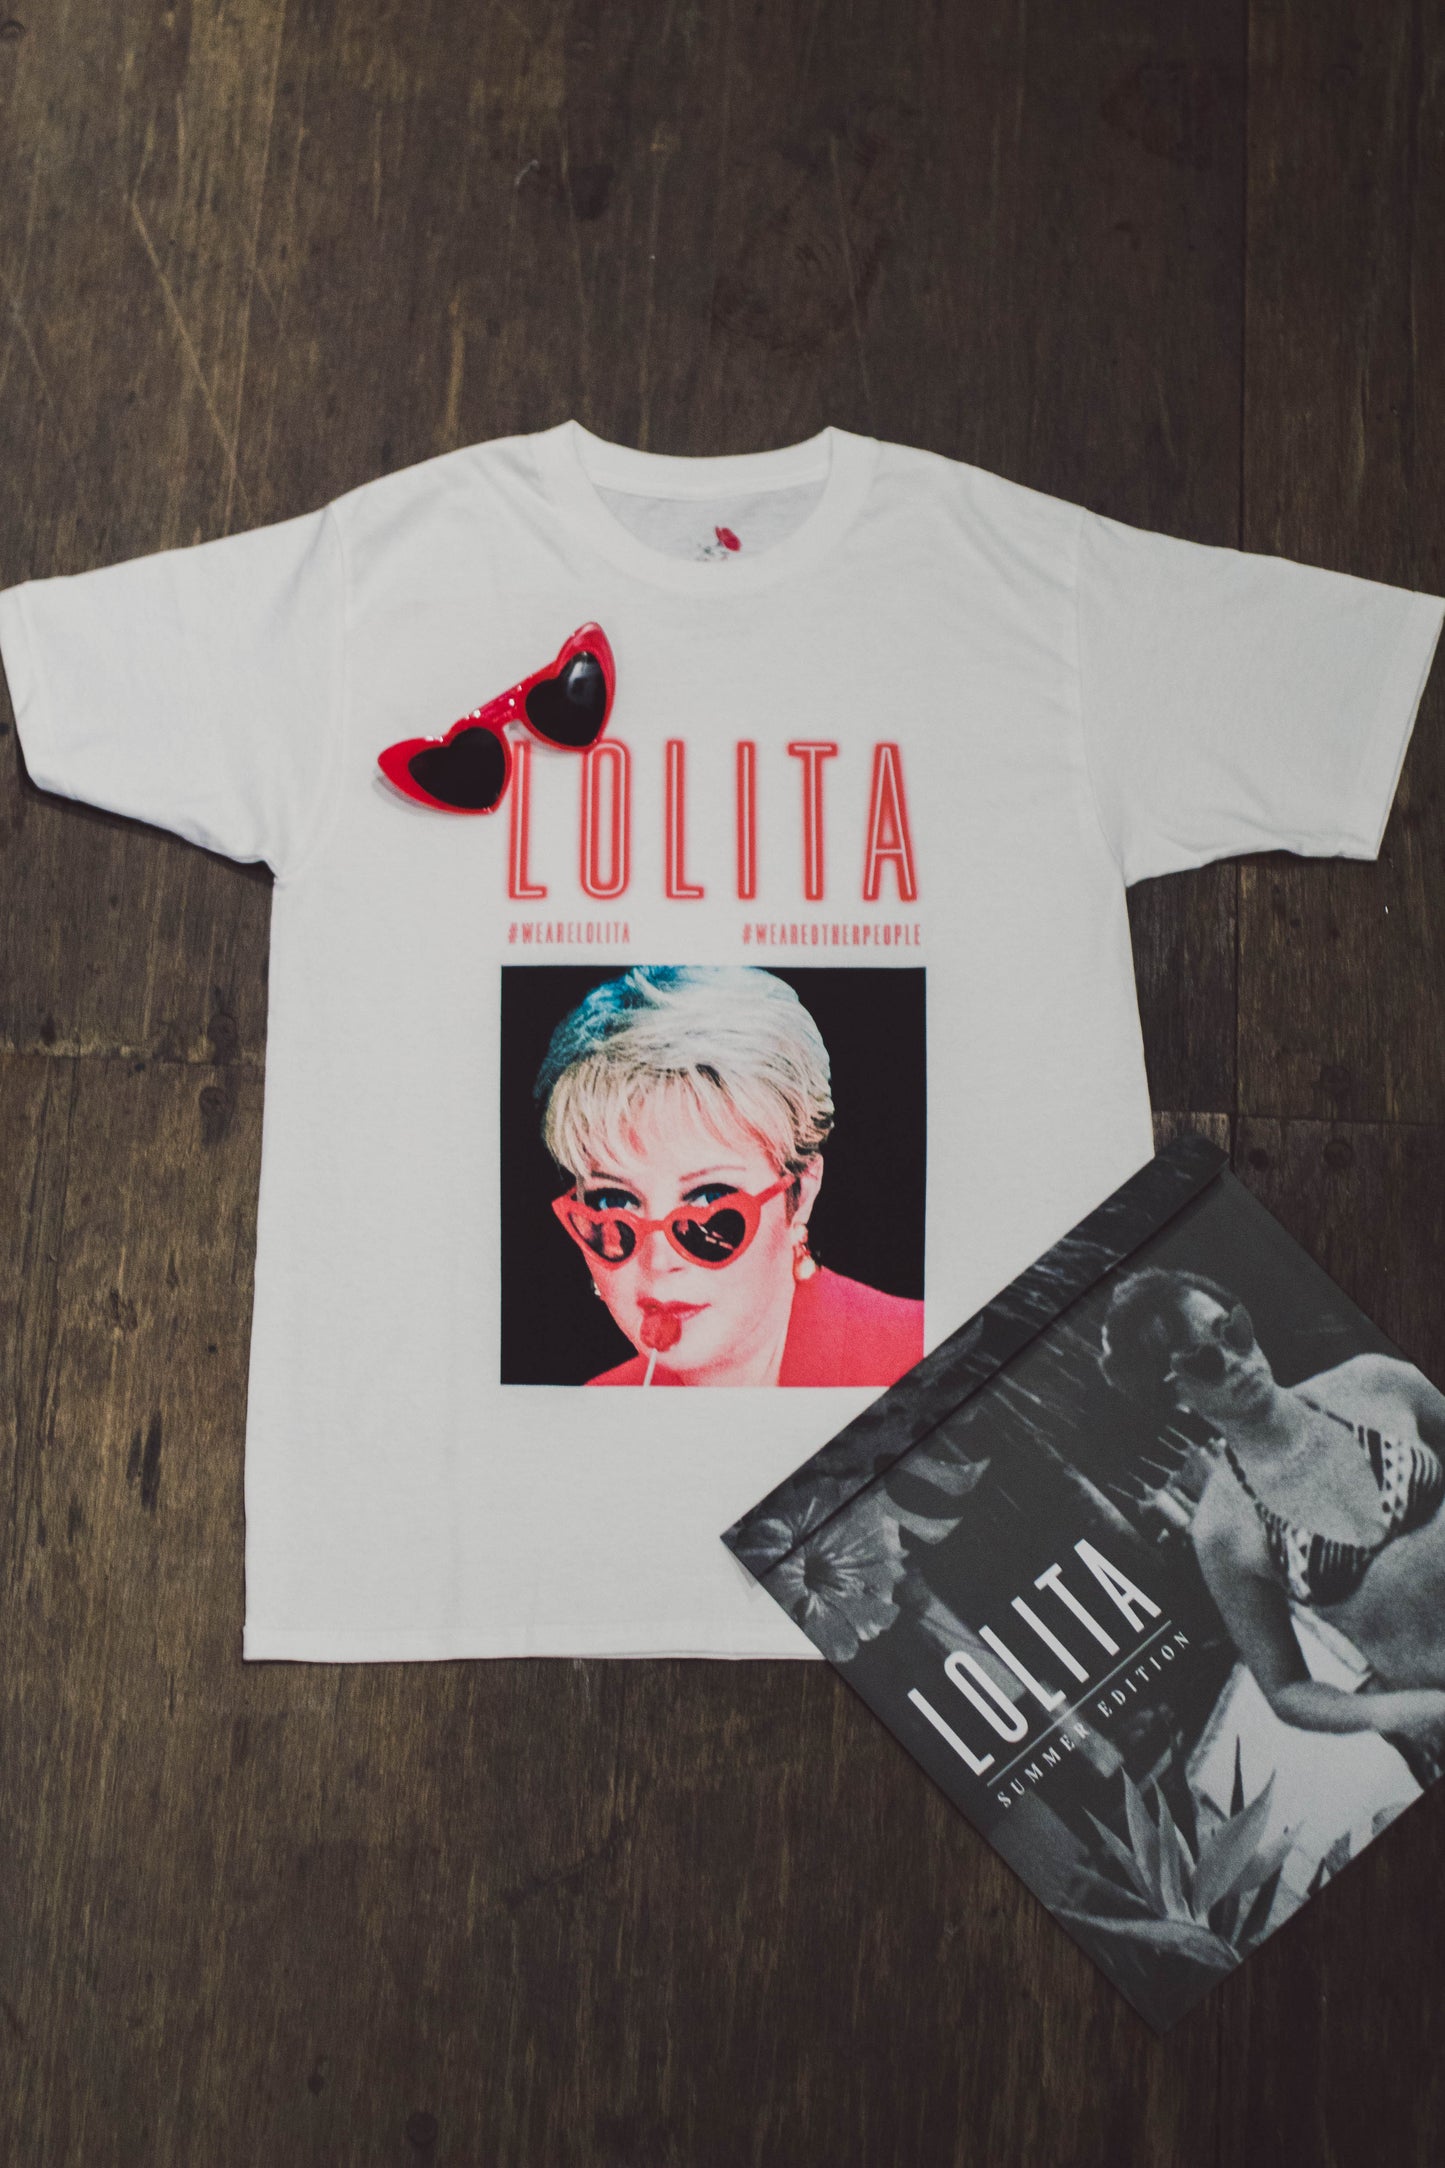 Lolita Summer x Other People